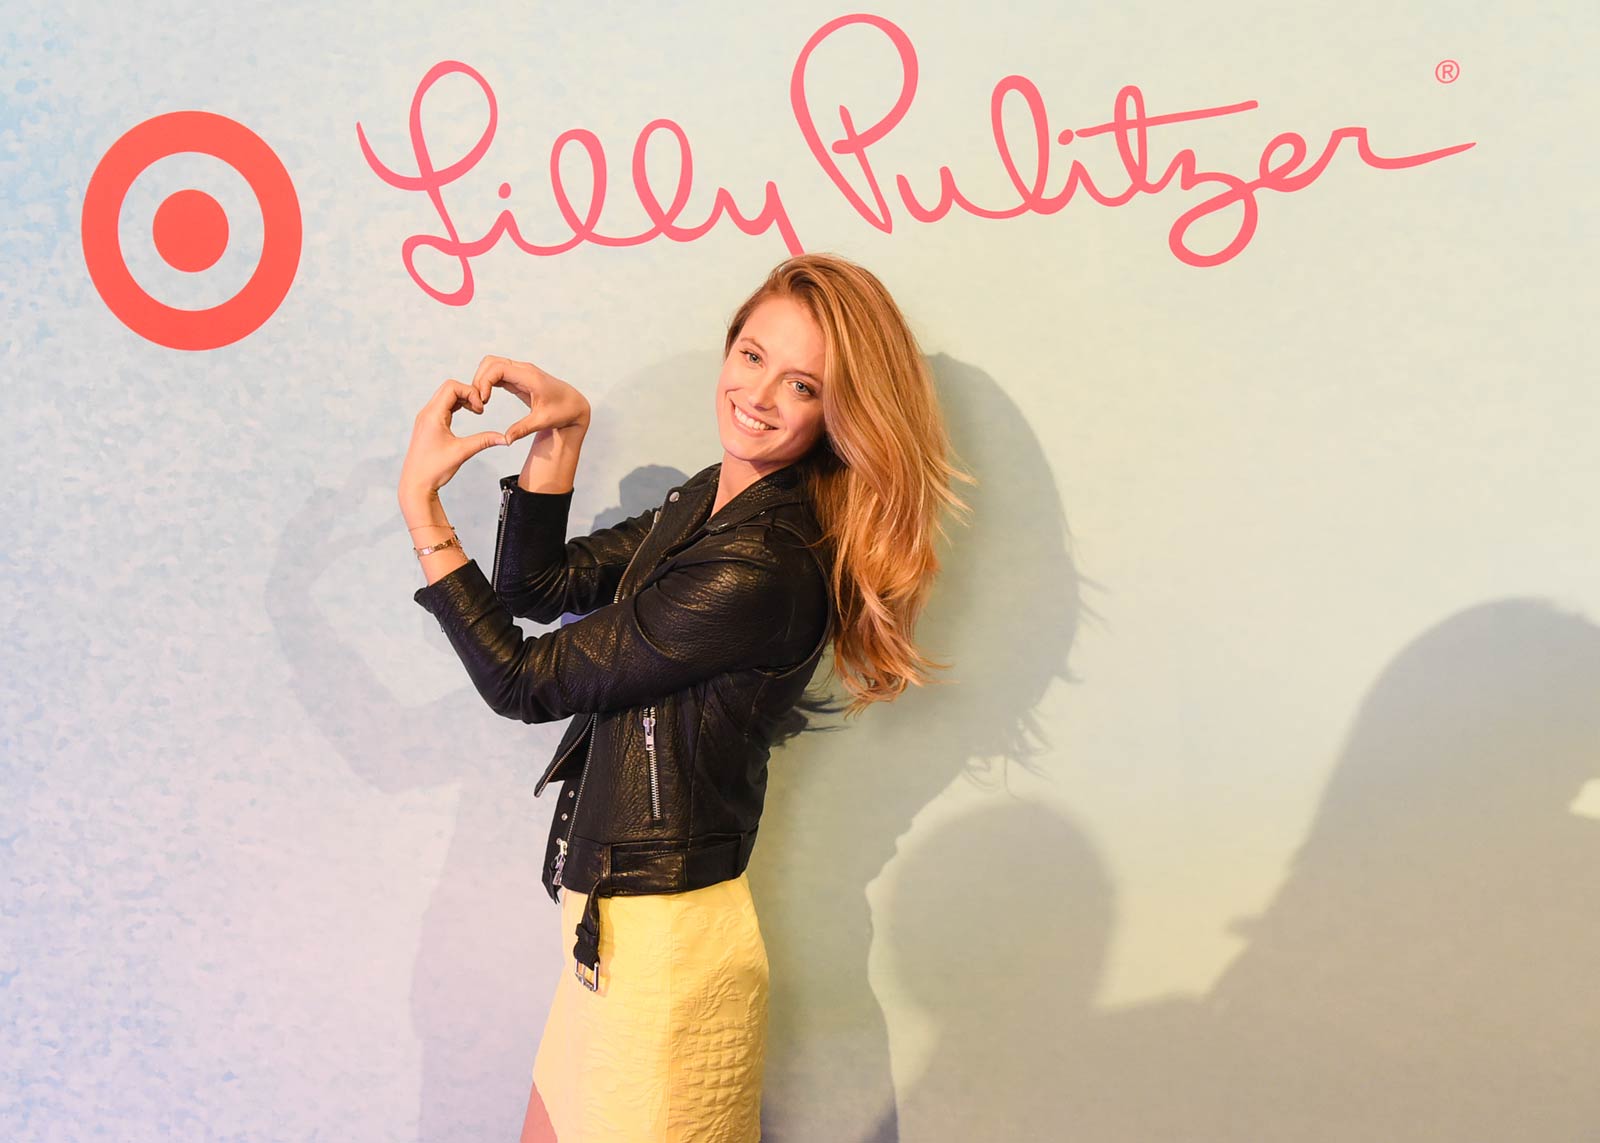 Kate Bock attends Lilly Pulitzer for Target event